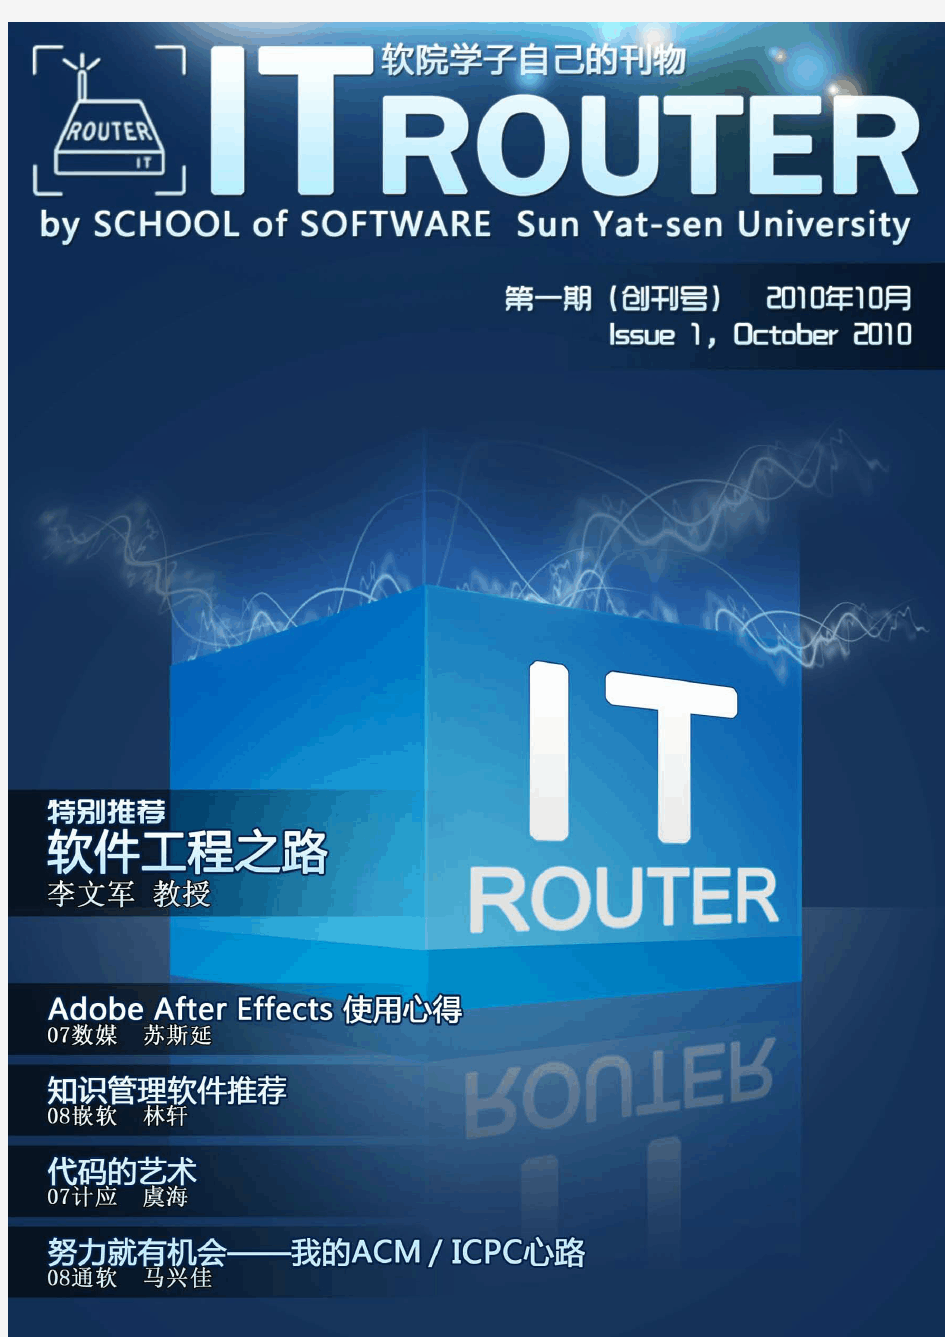 ITRouter_issue01